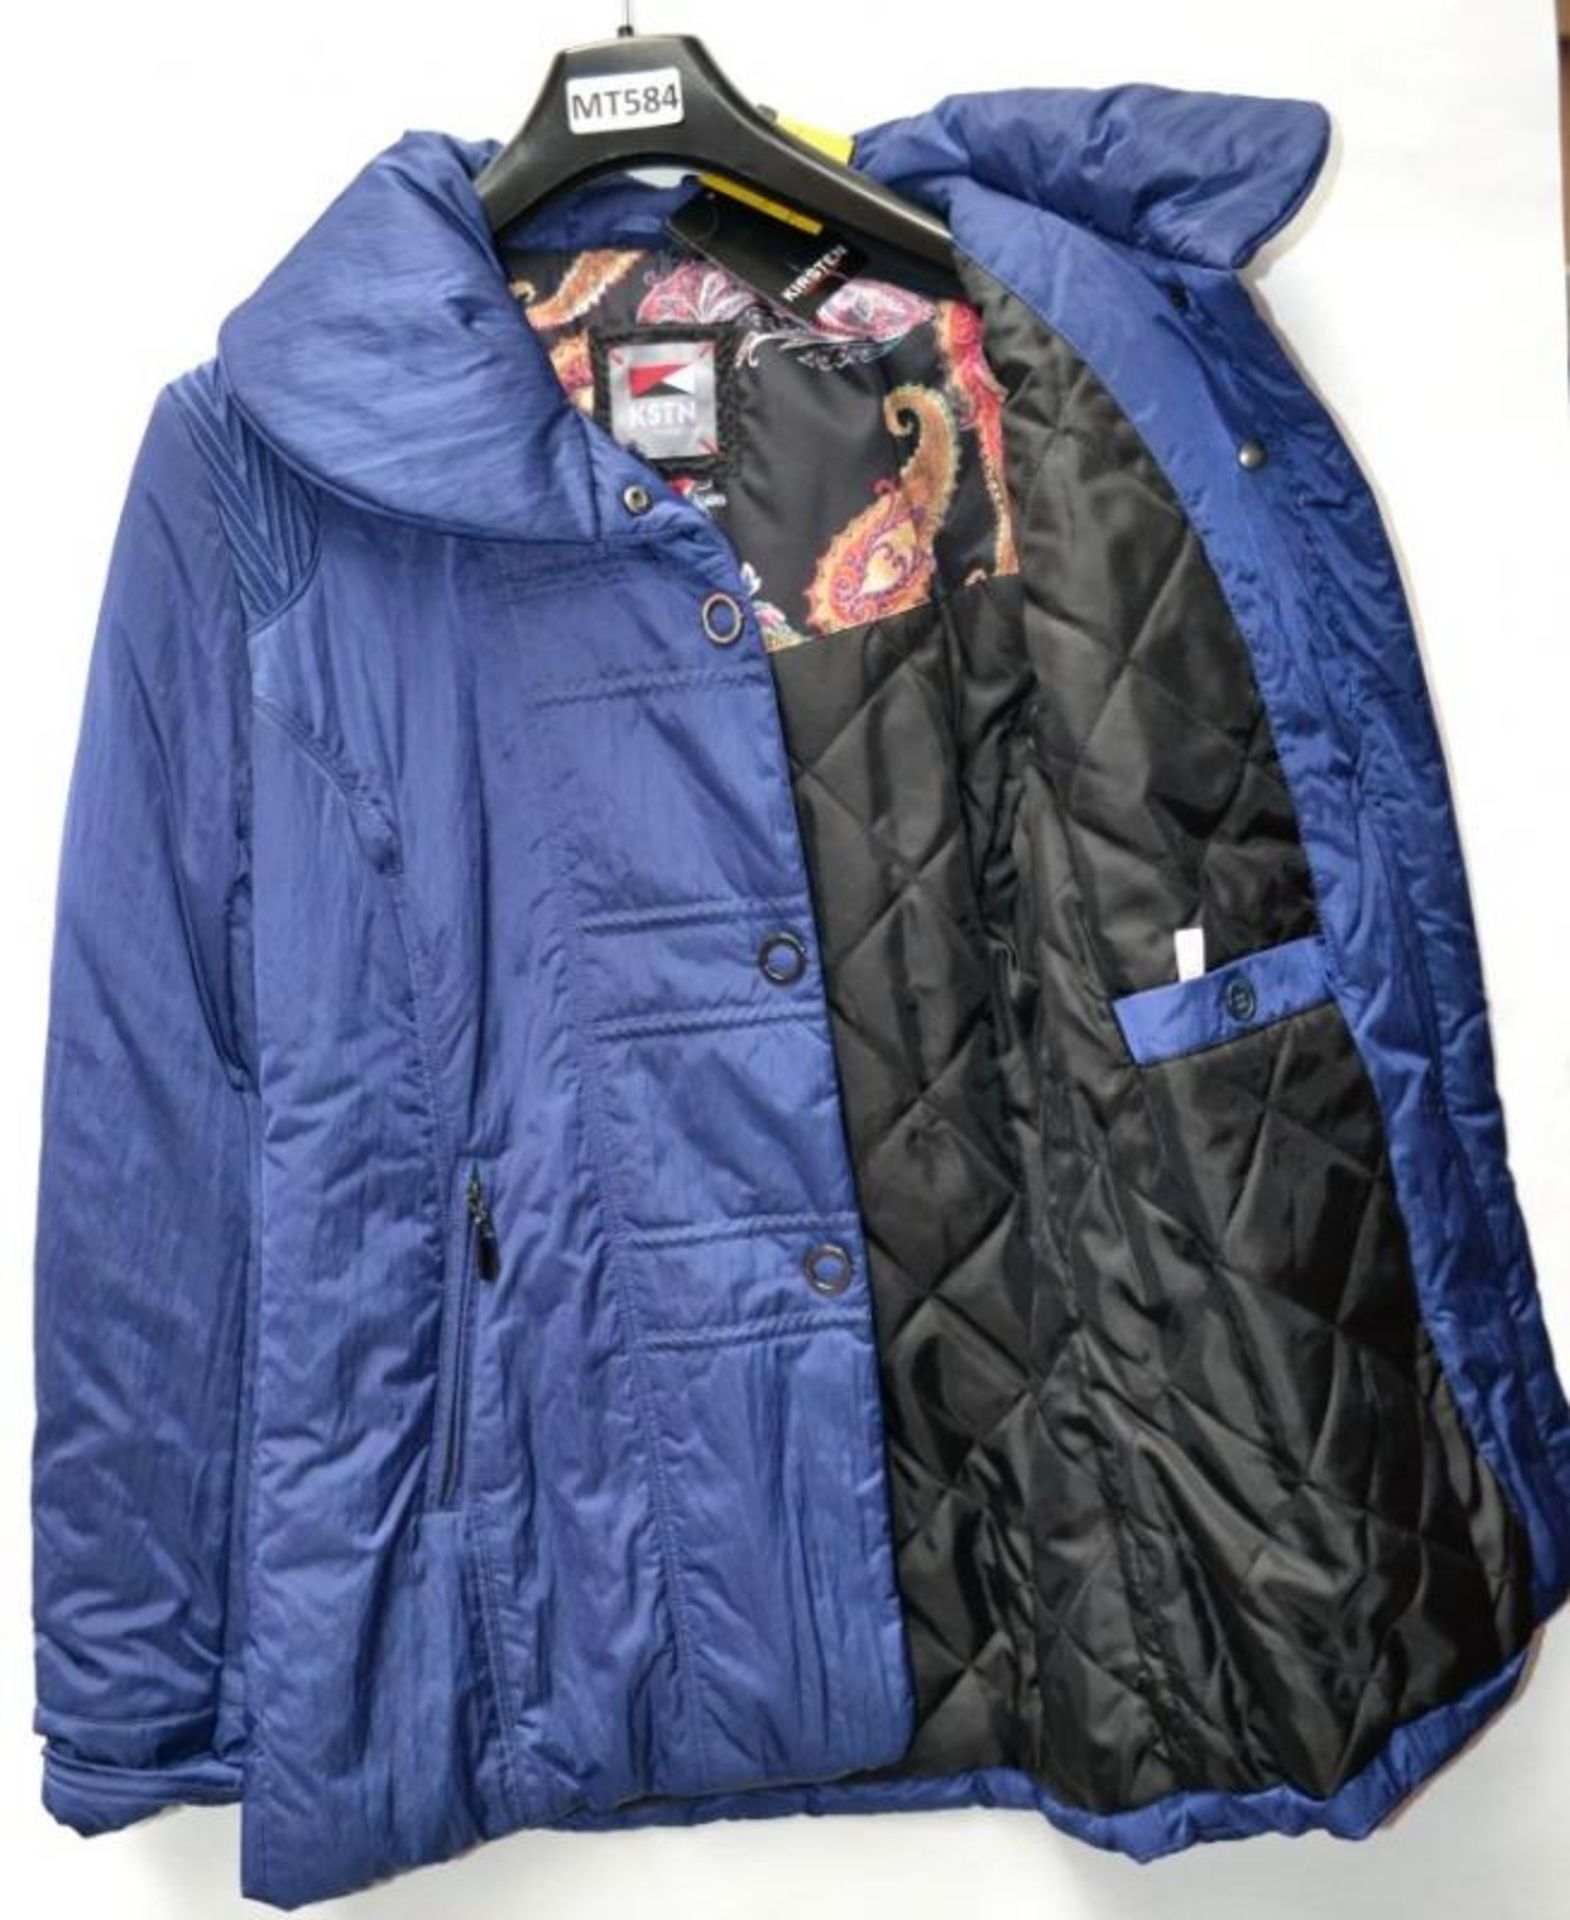 1 x Steilmann KSTN By Kirsten Womens Coat - Padded Coat In Bright Blue - UK Size 12 - New Sample Sto - Image 2 of 3